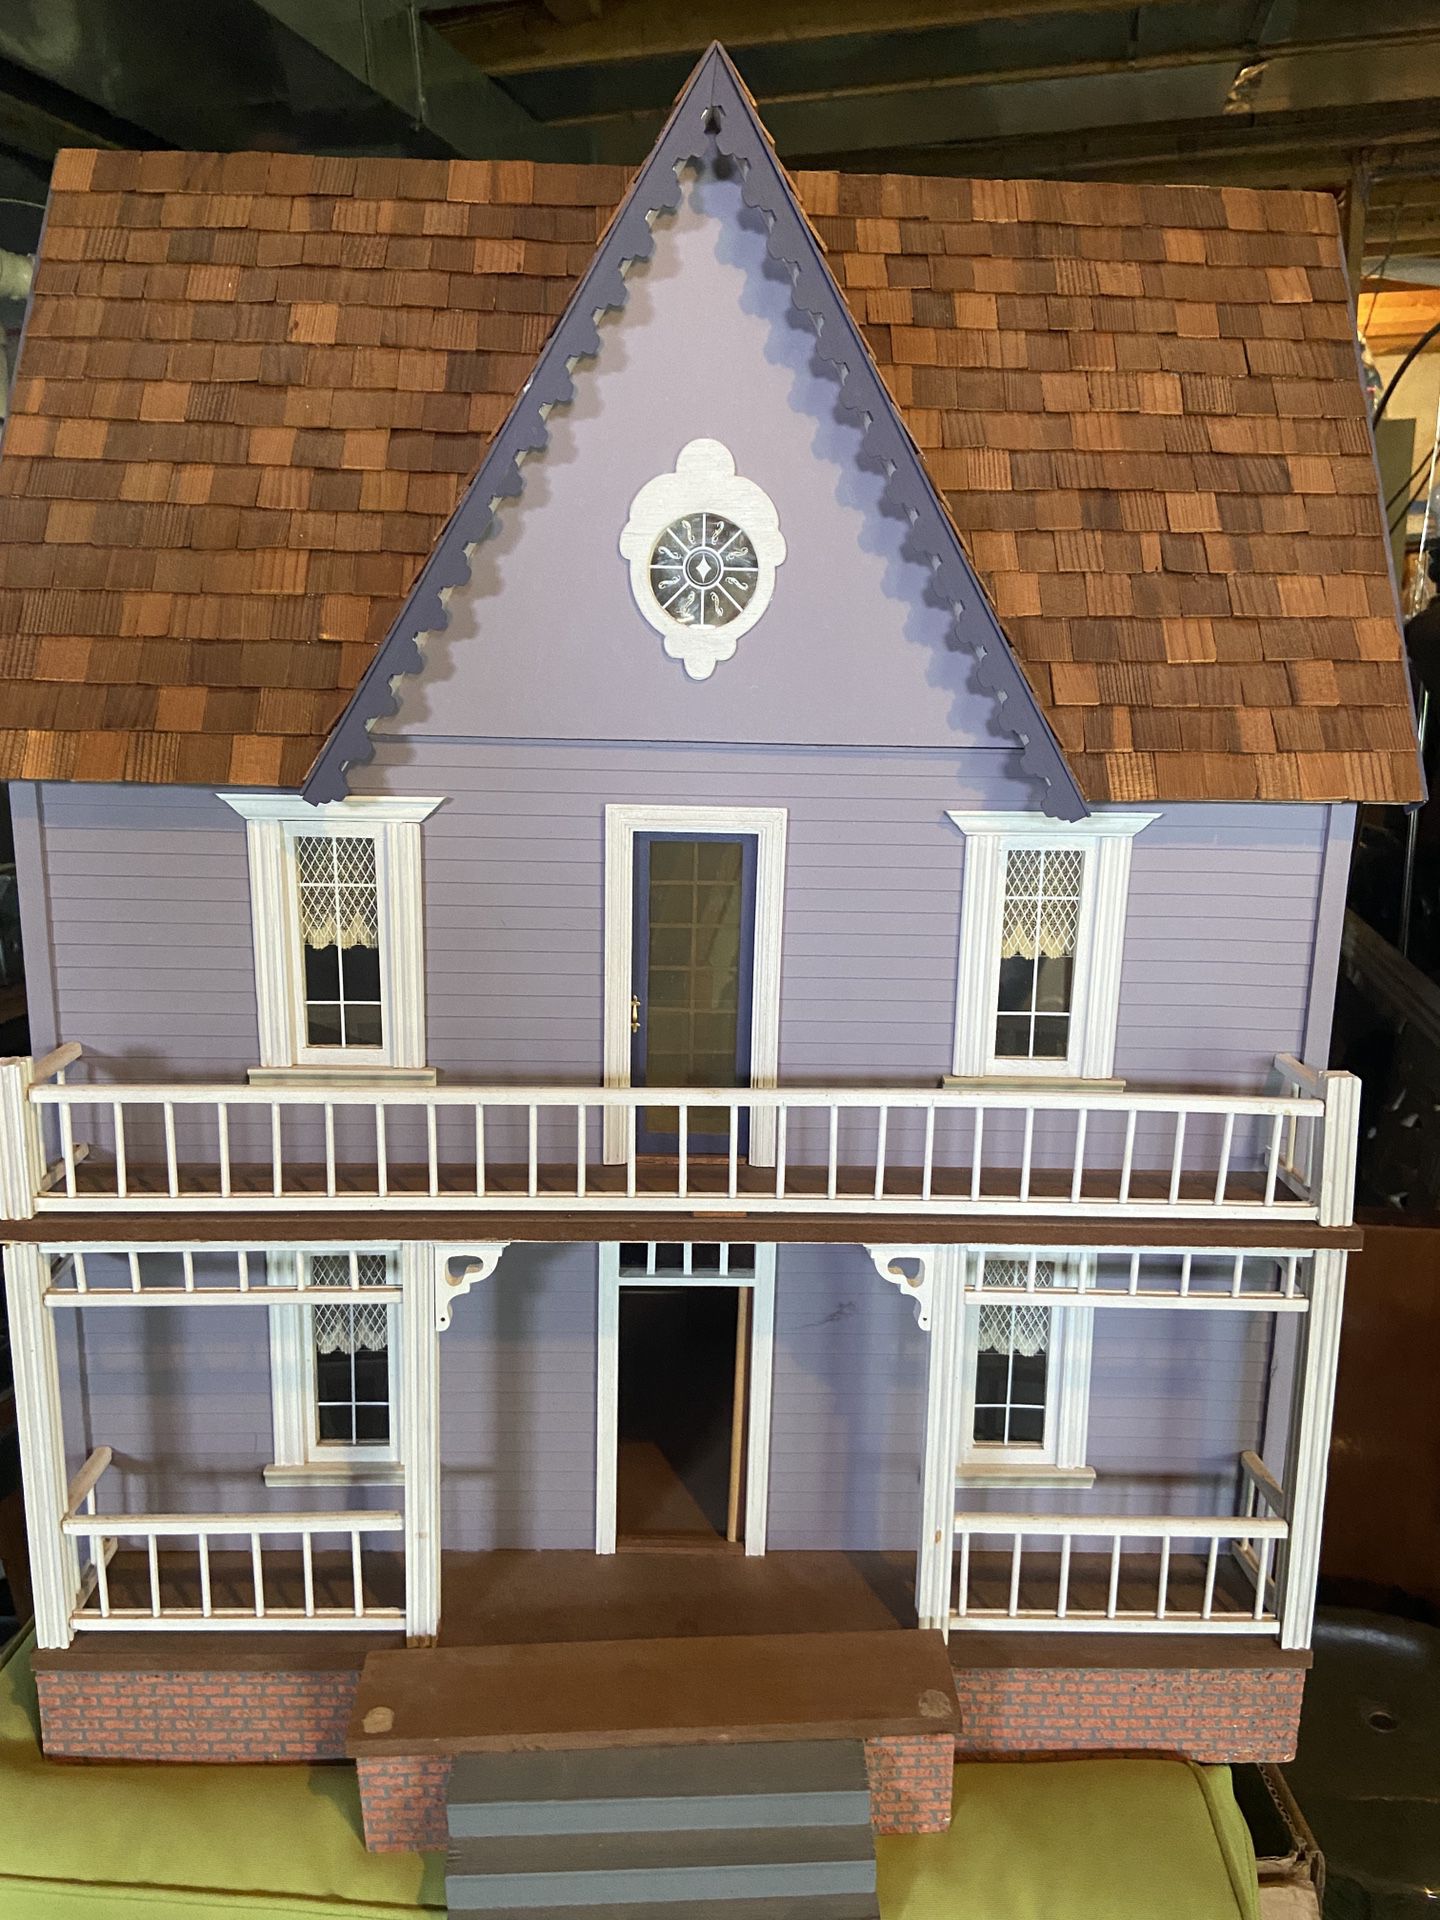 Doll House- Victorian